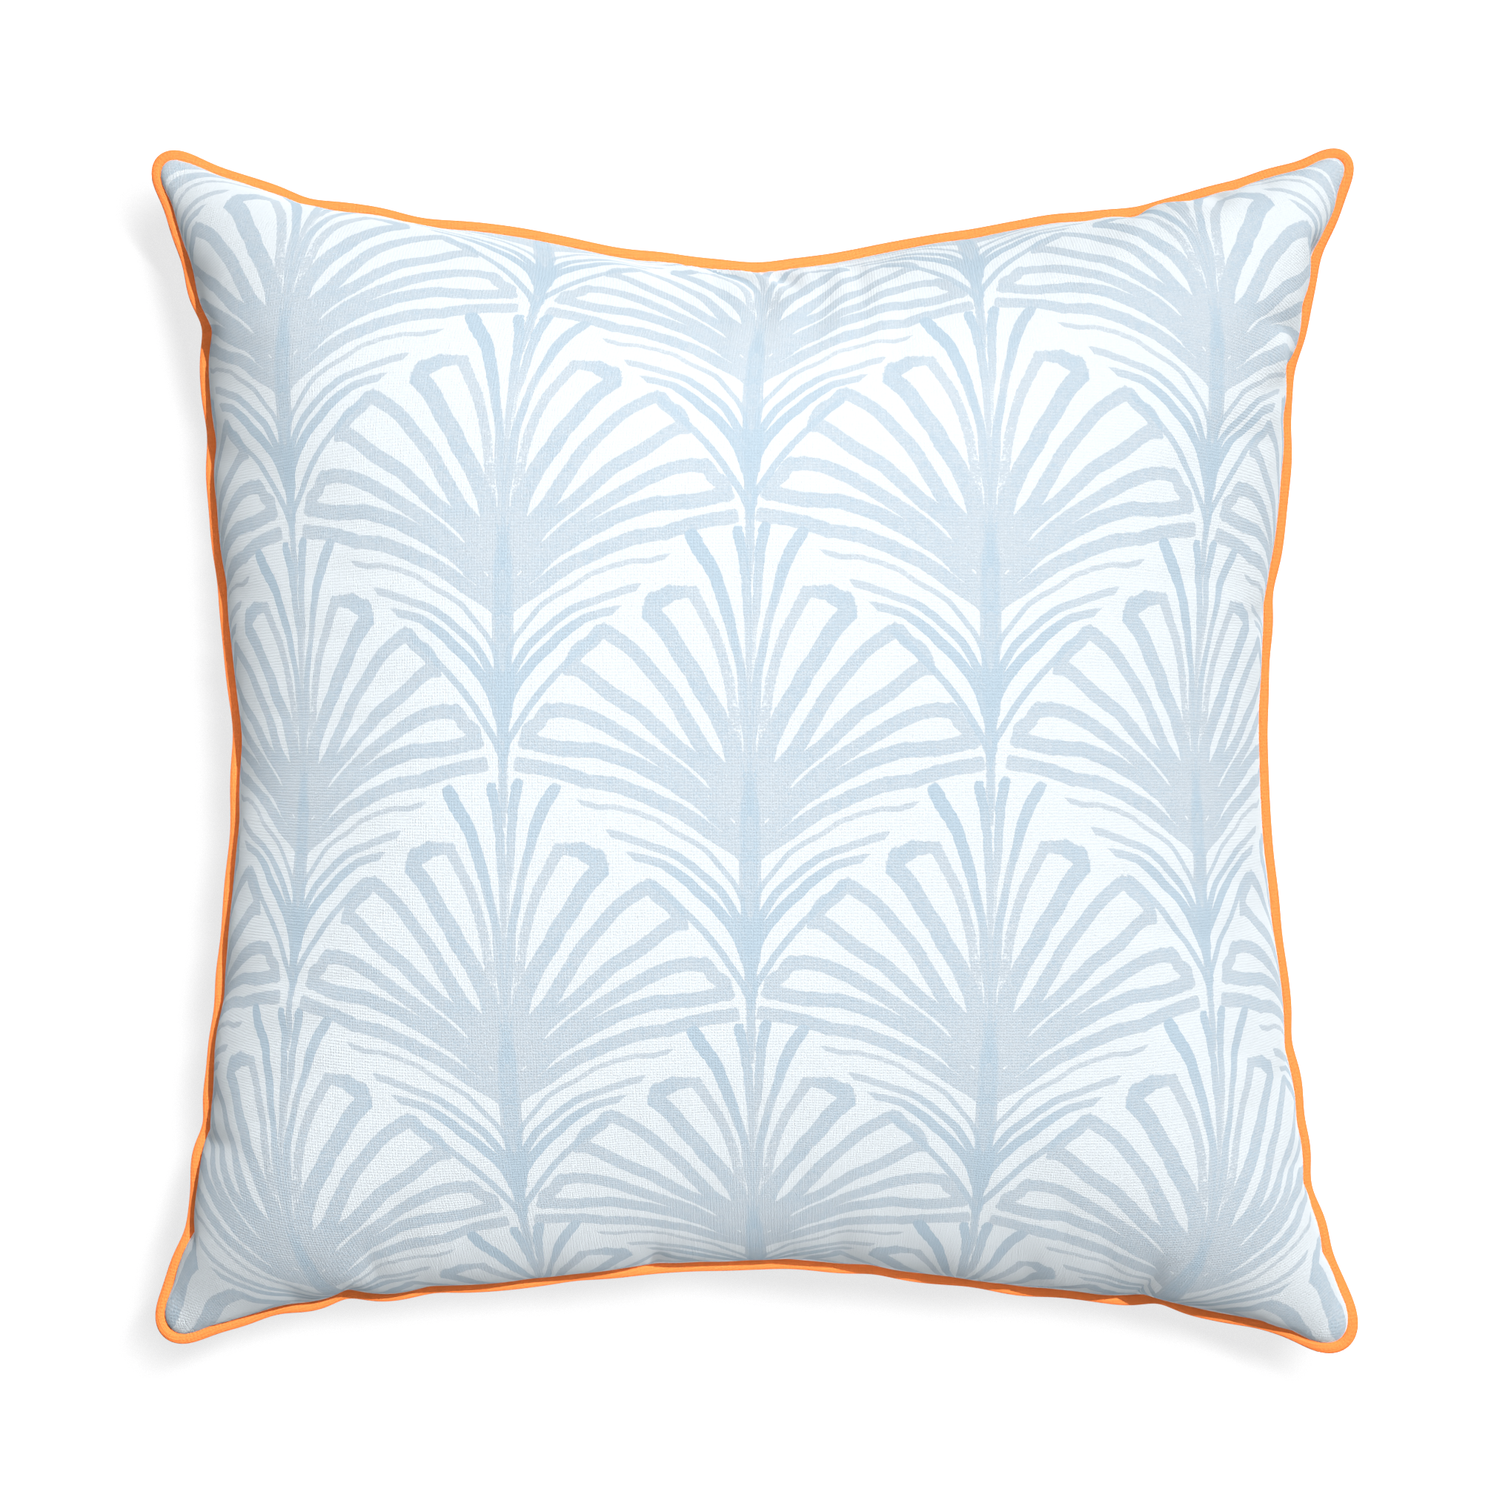 Euro-sham suzy sky custom pillow with clementine piping on white background